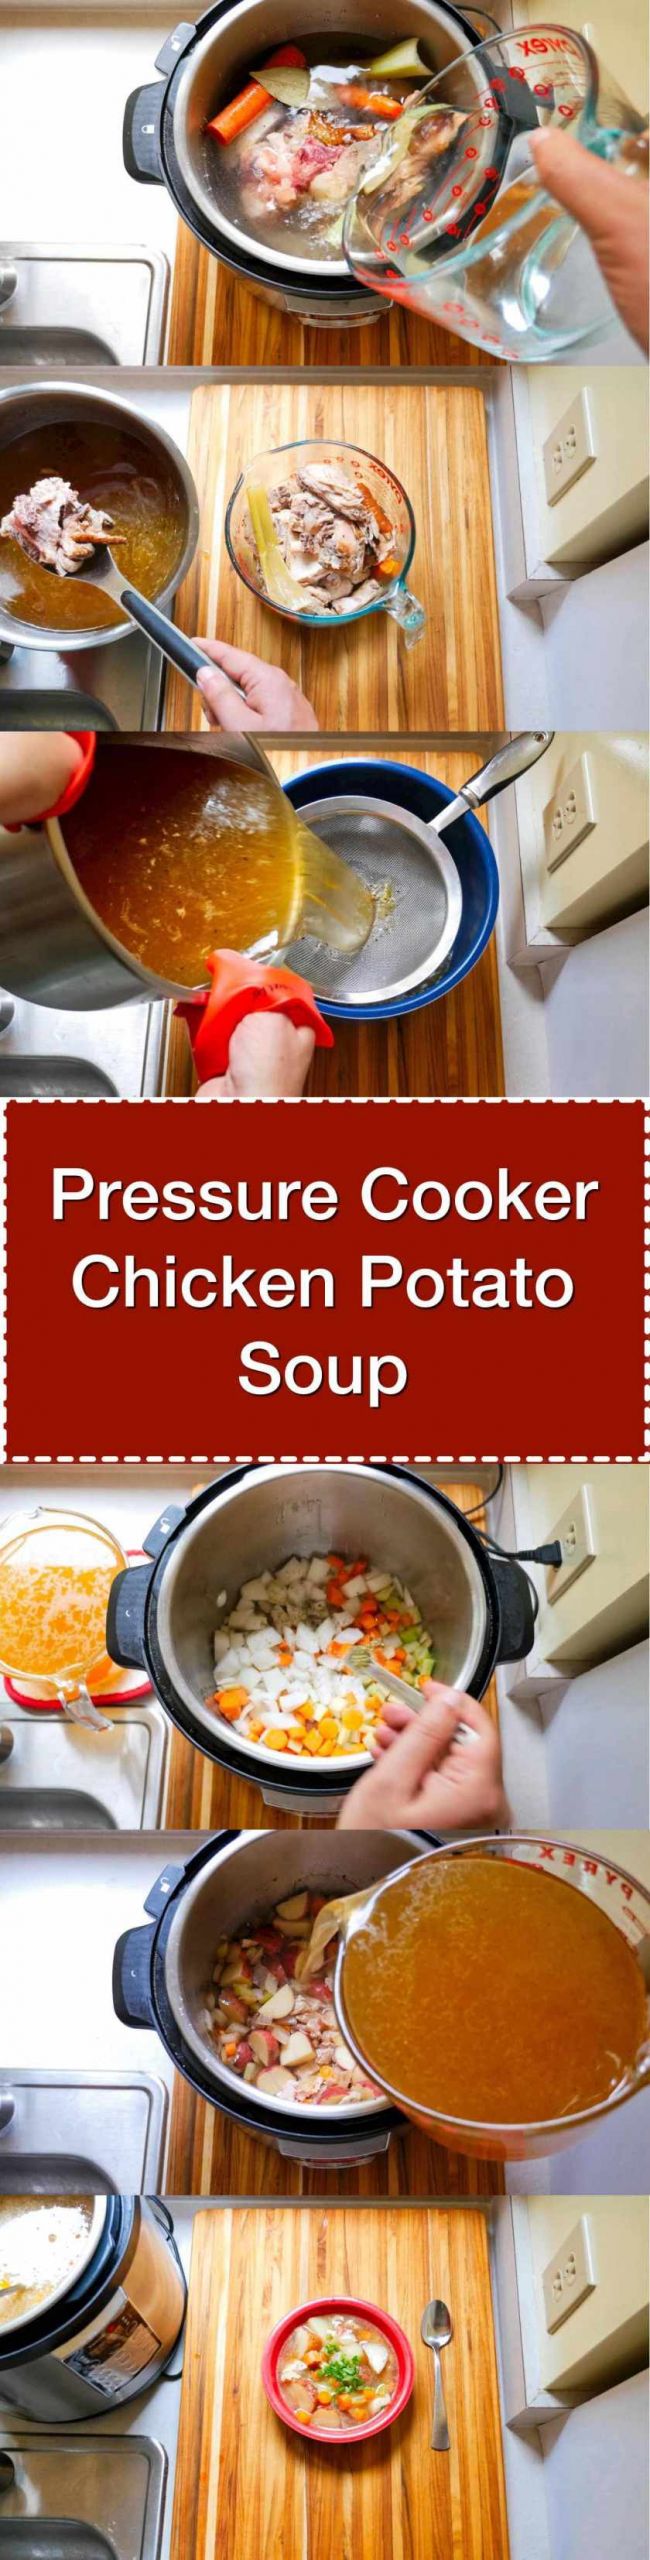 Chicken Soup From Scratch
 Pressure Cooker Chicken Potato Soup from Scratch